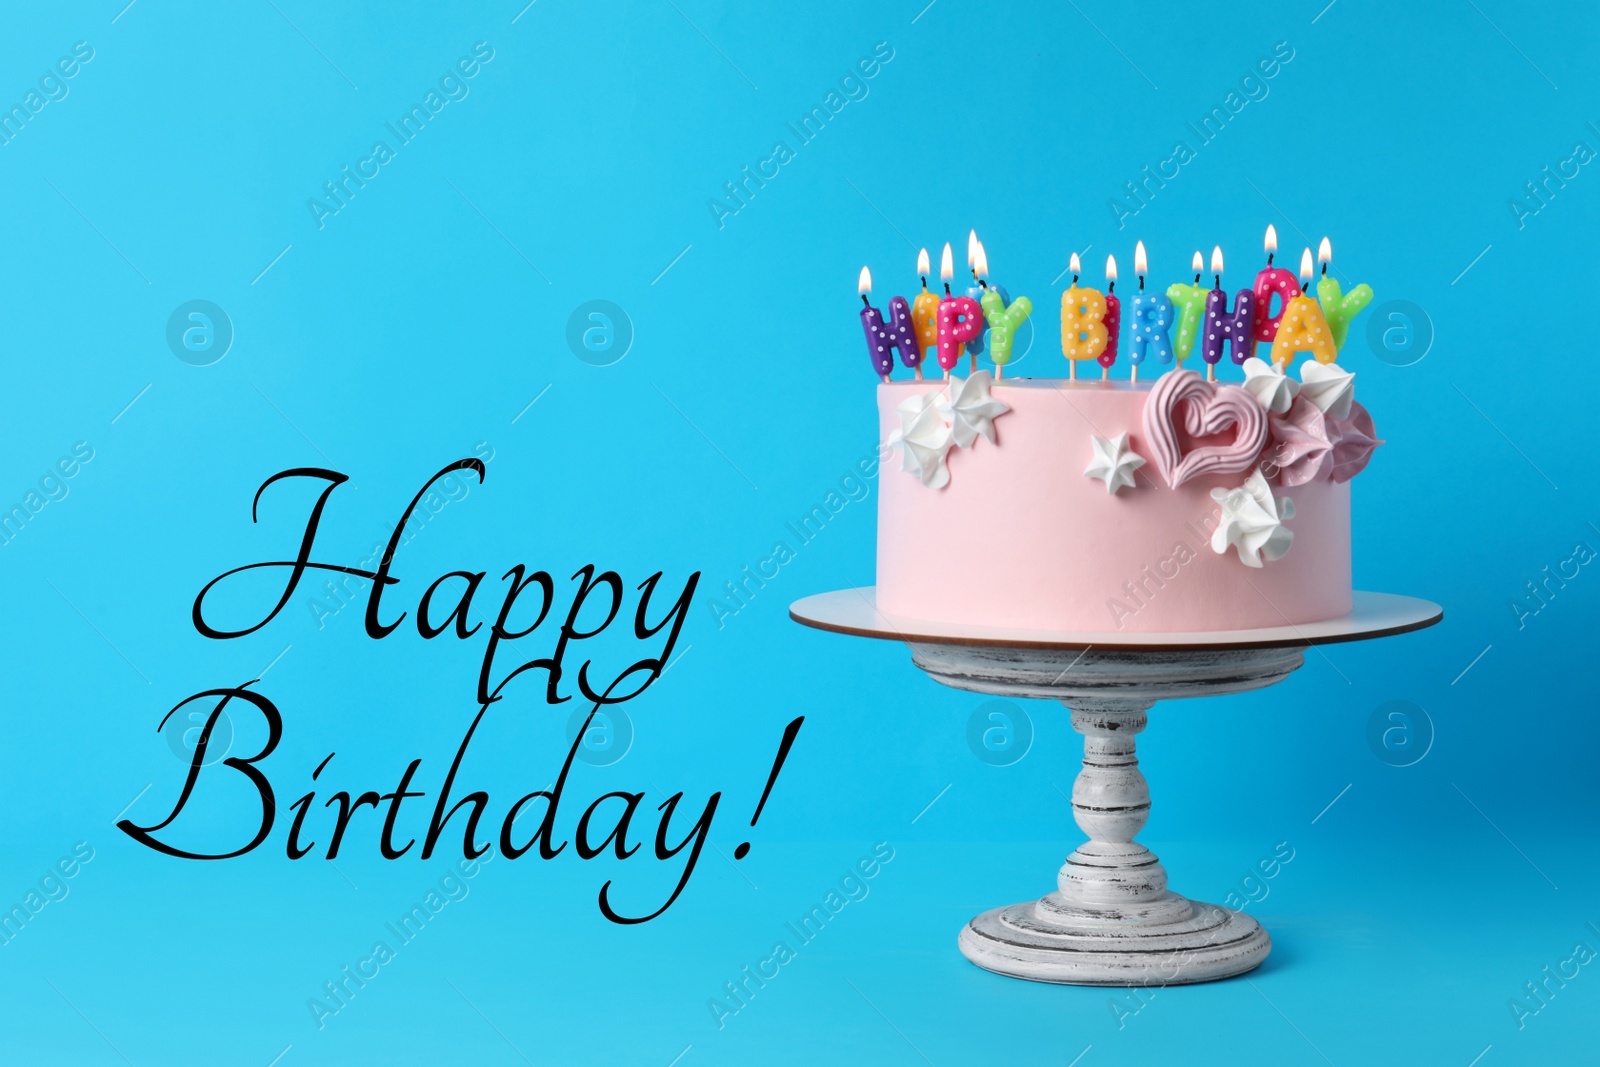 Image of Happy Birthday! Delicious cake with burning candles on light blue background